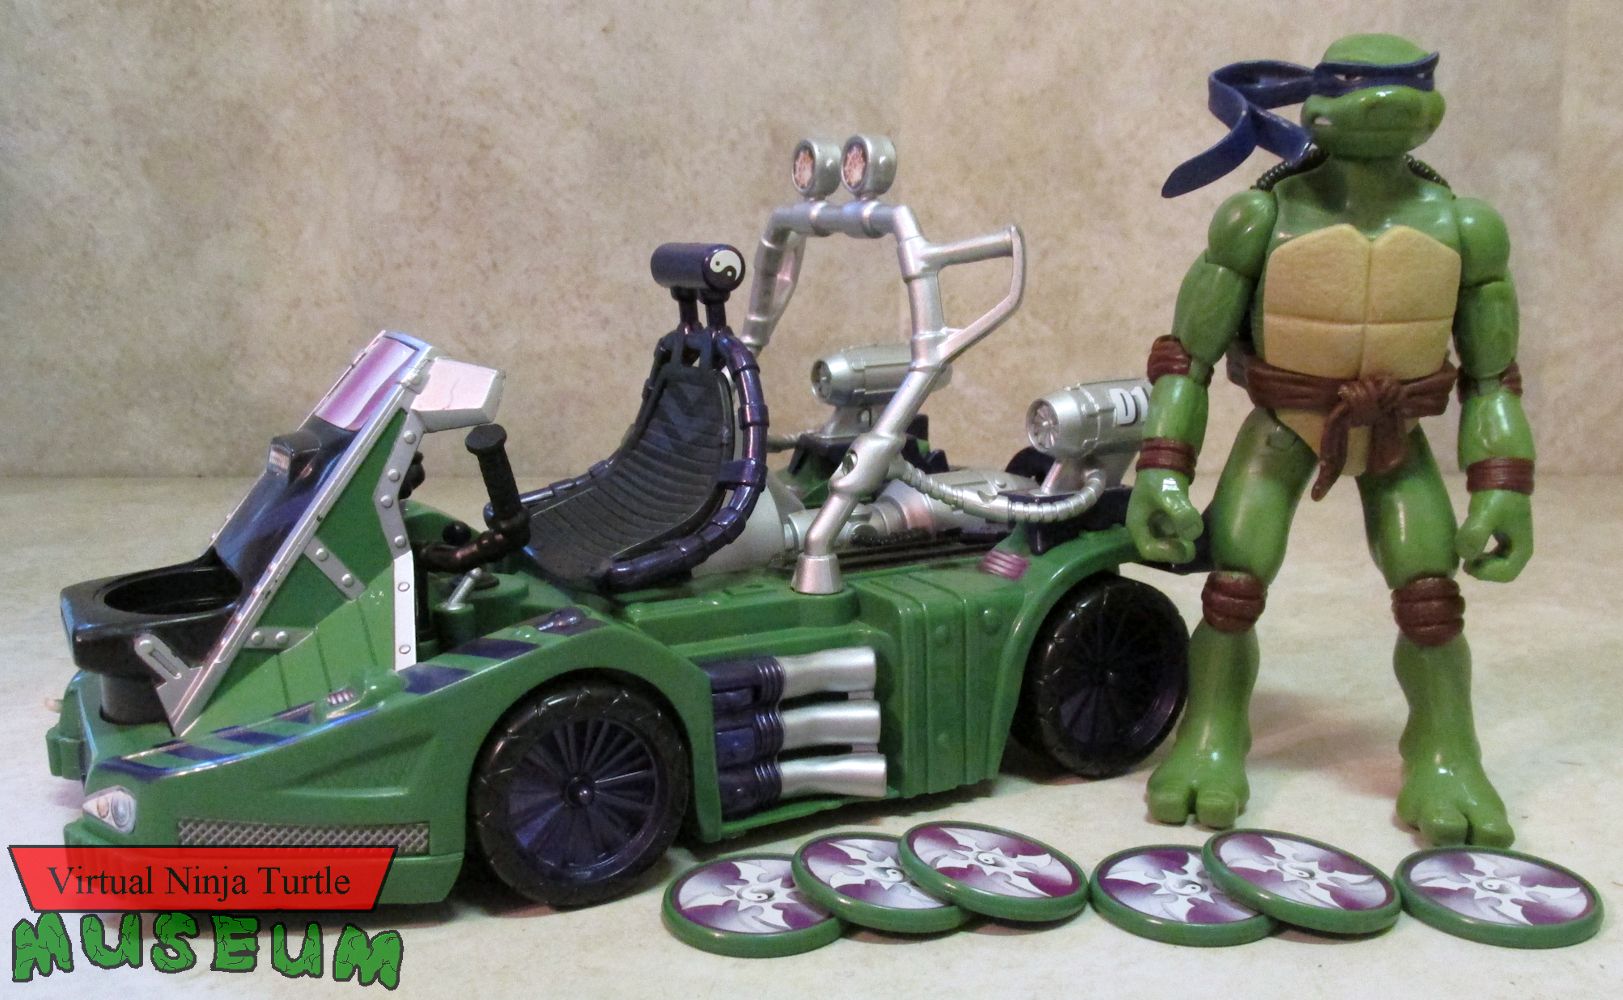 Donatello with vehicle and accessories